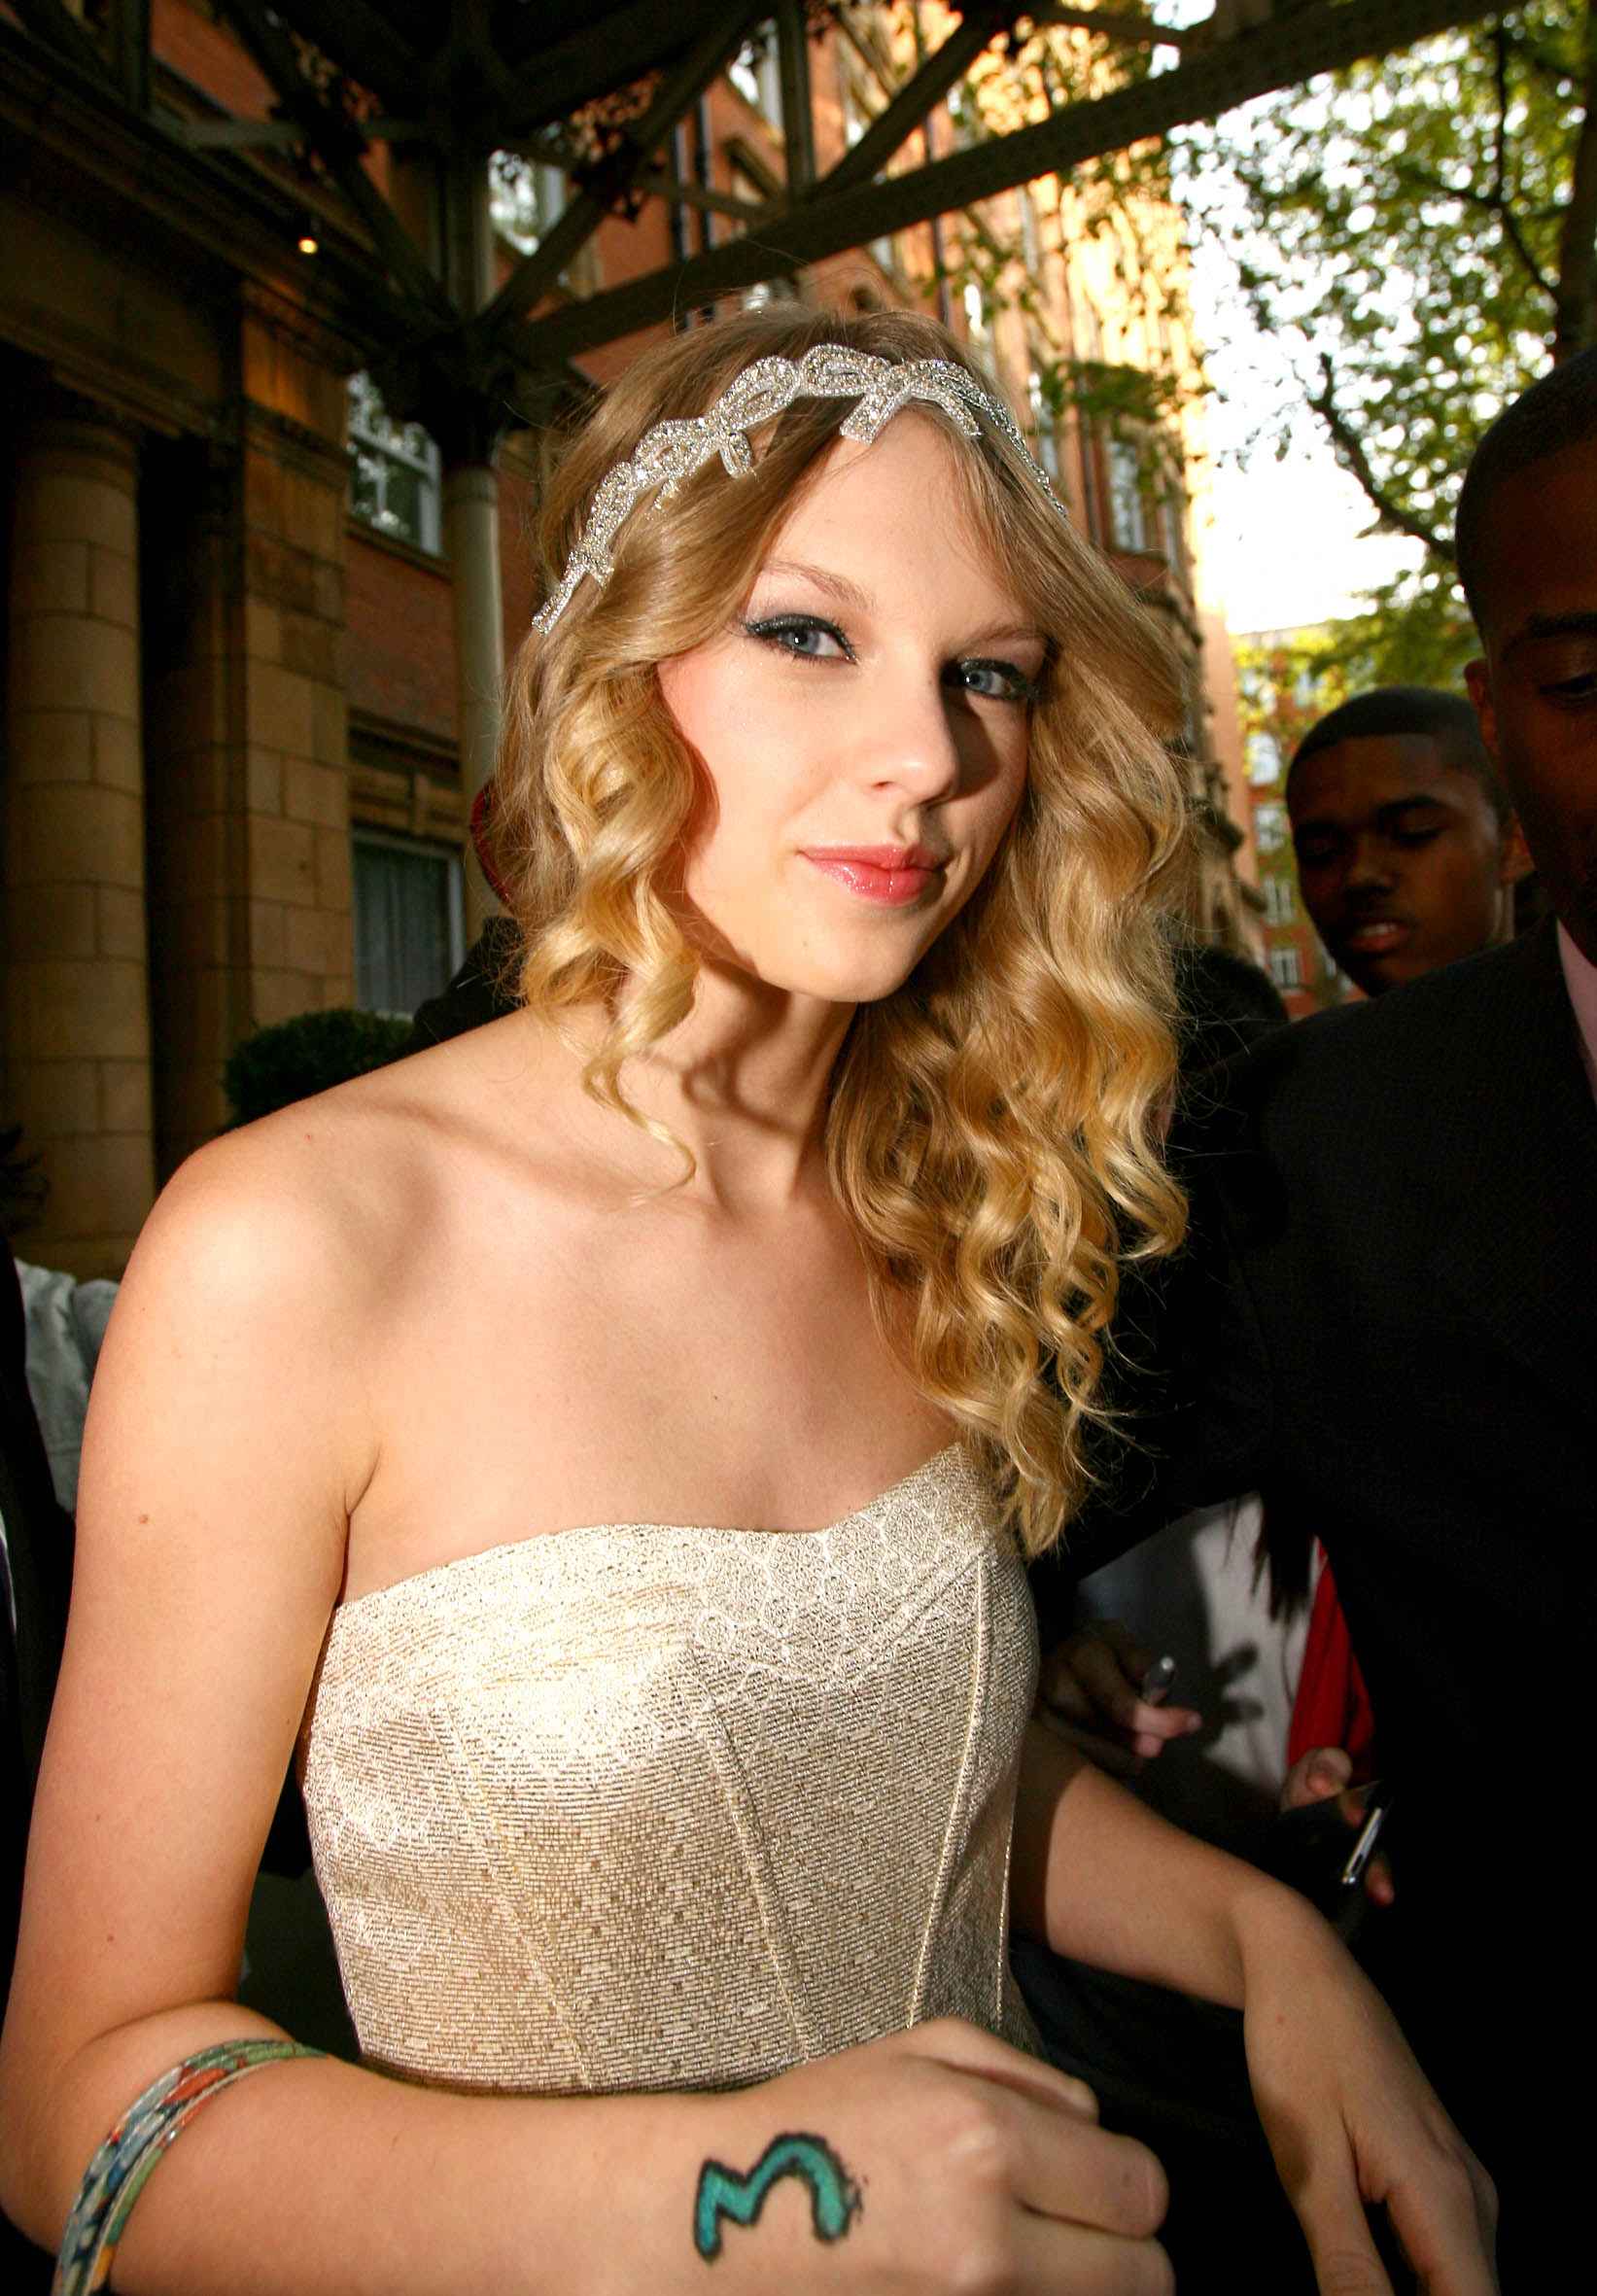 Taylor Swift Heading to BBC Studios in London May 2009 | TAYLOR SWIFT INDONESIA